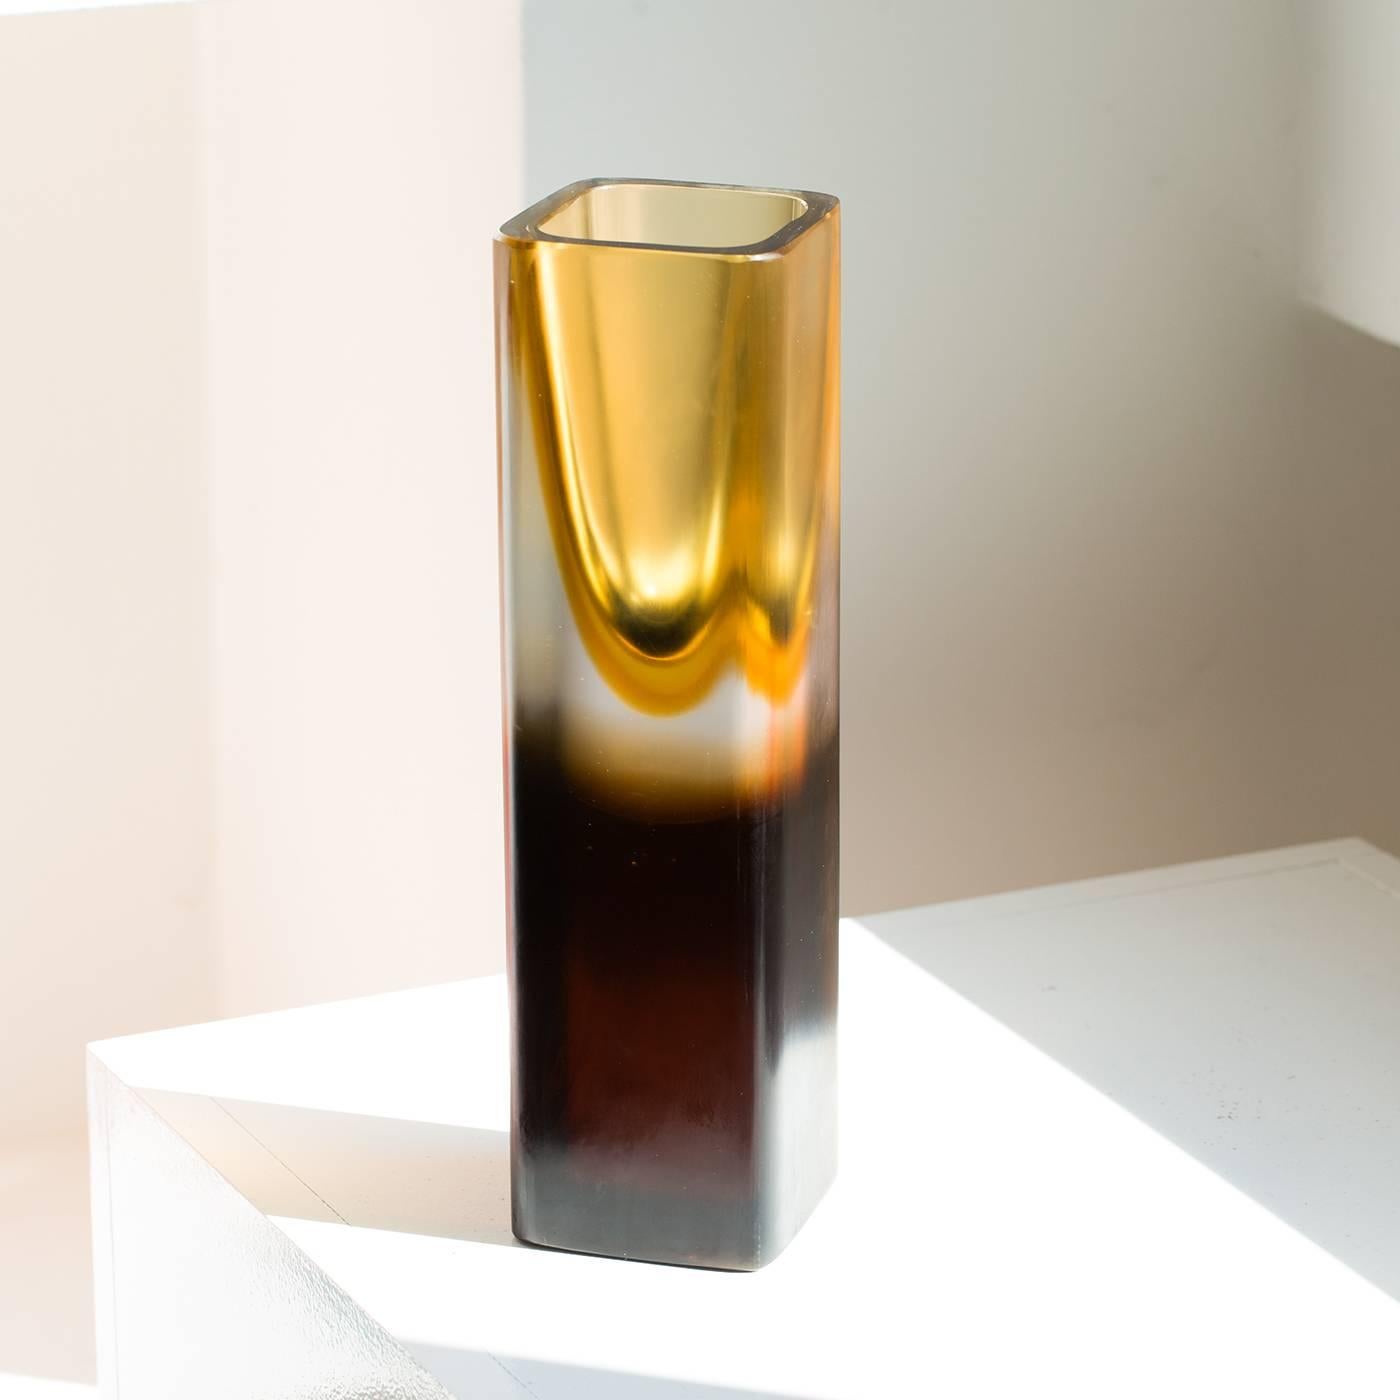 This exquisite mouth-blown, handcrafted vase is made up of two elements: an ethereal amber-colored top rests on a solid dark base. This unique piece is hand finished with a diamond grindstone for a silk-like, uniform surface.